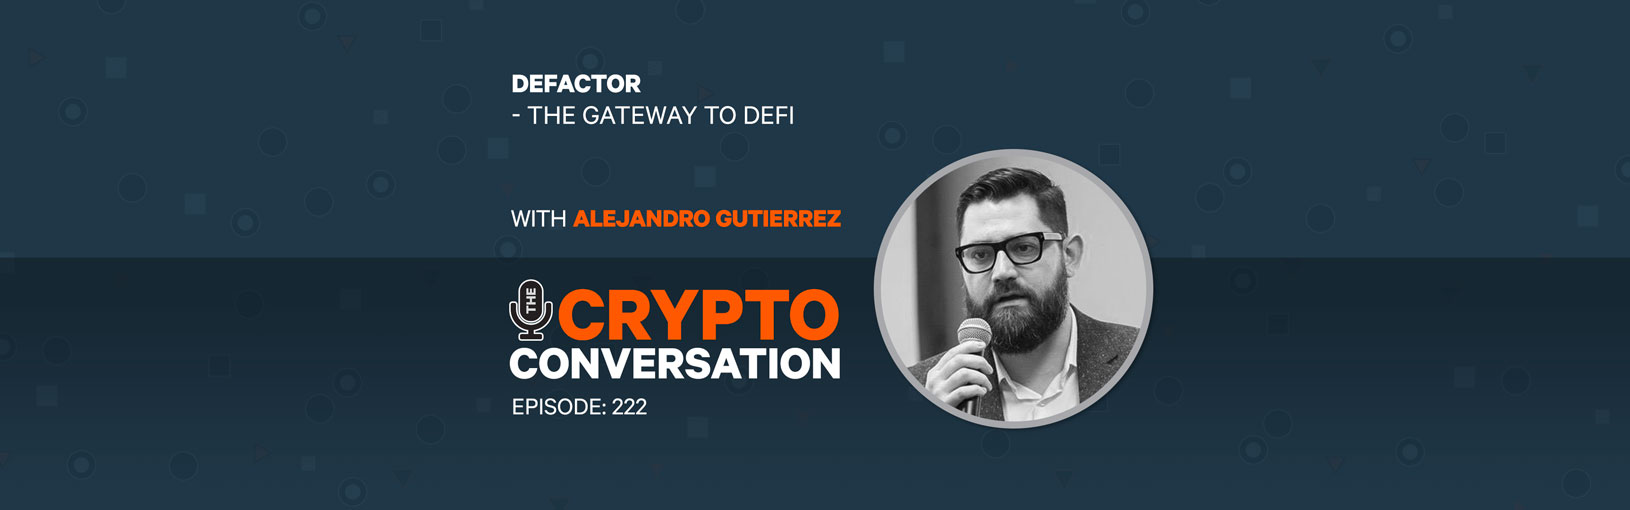 Defactor – The gateway to DeFi